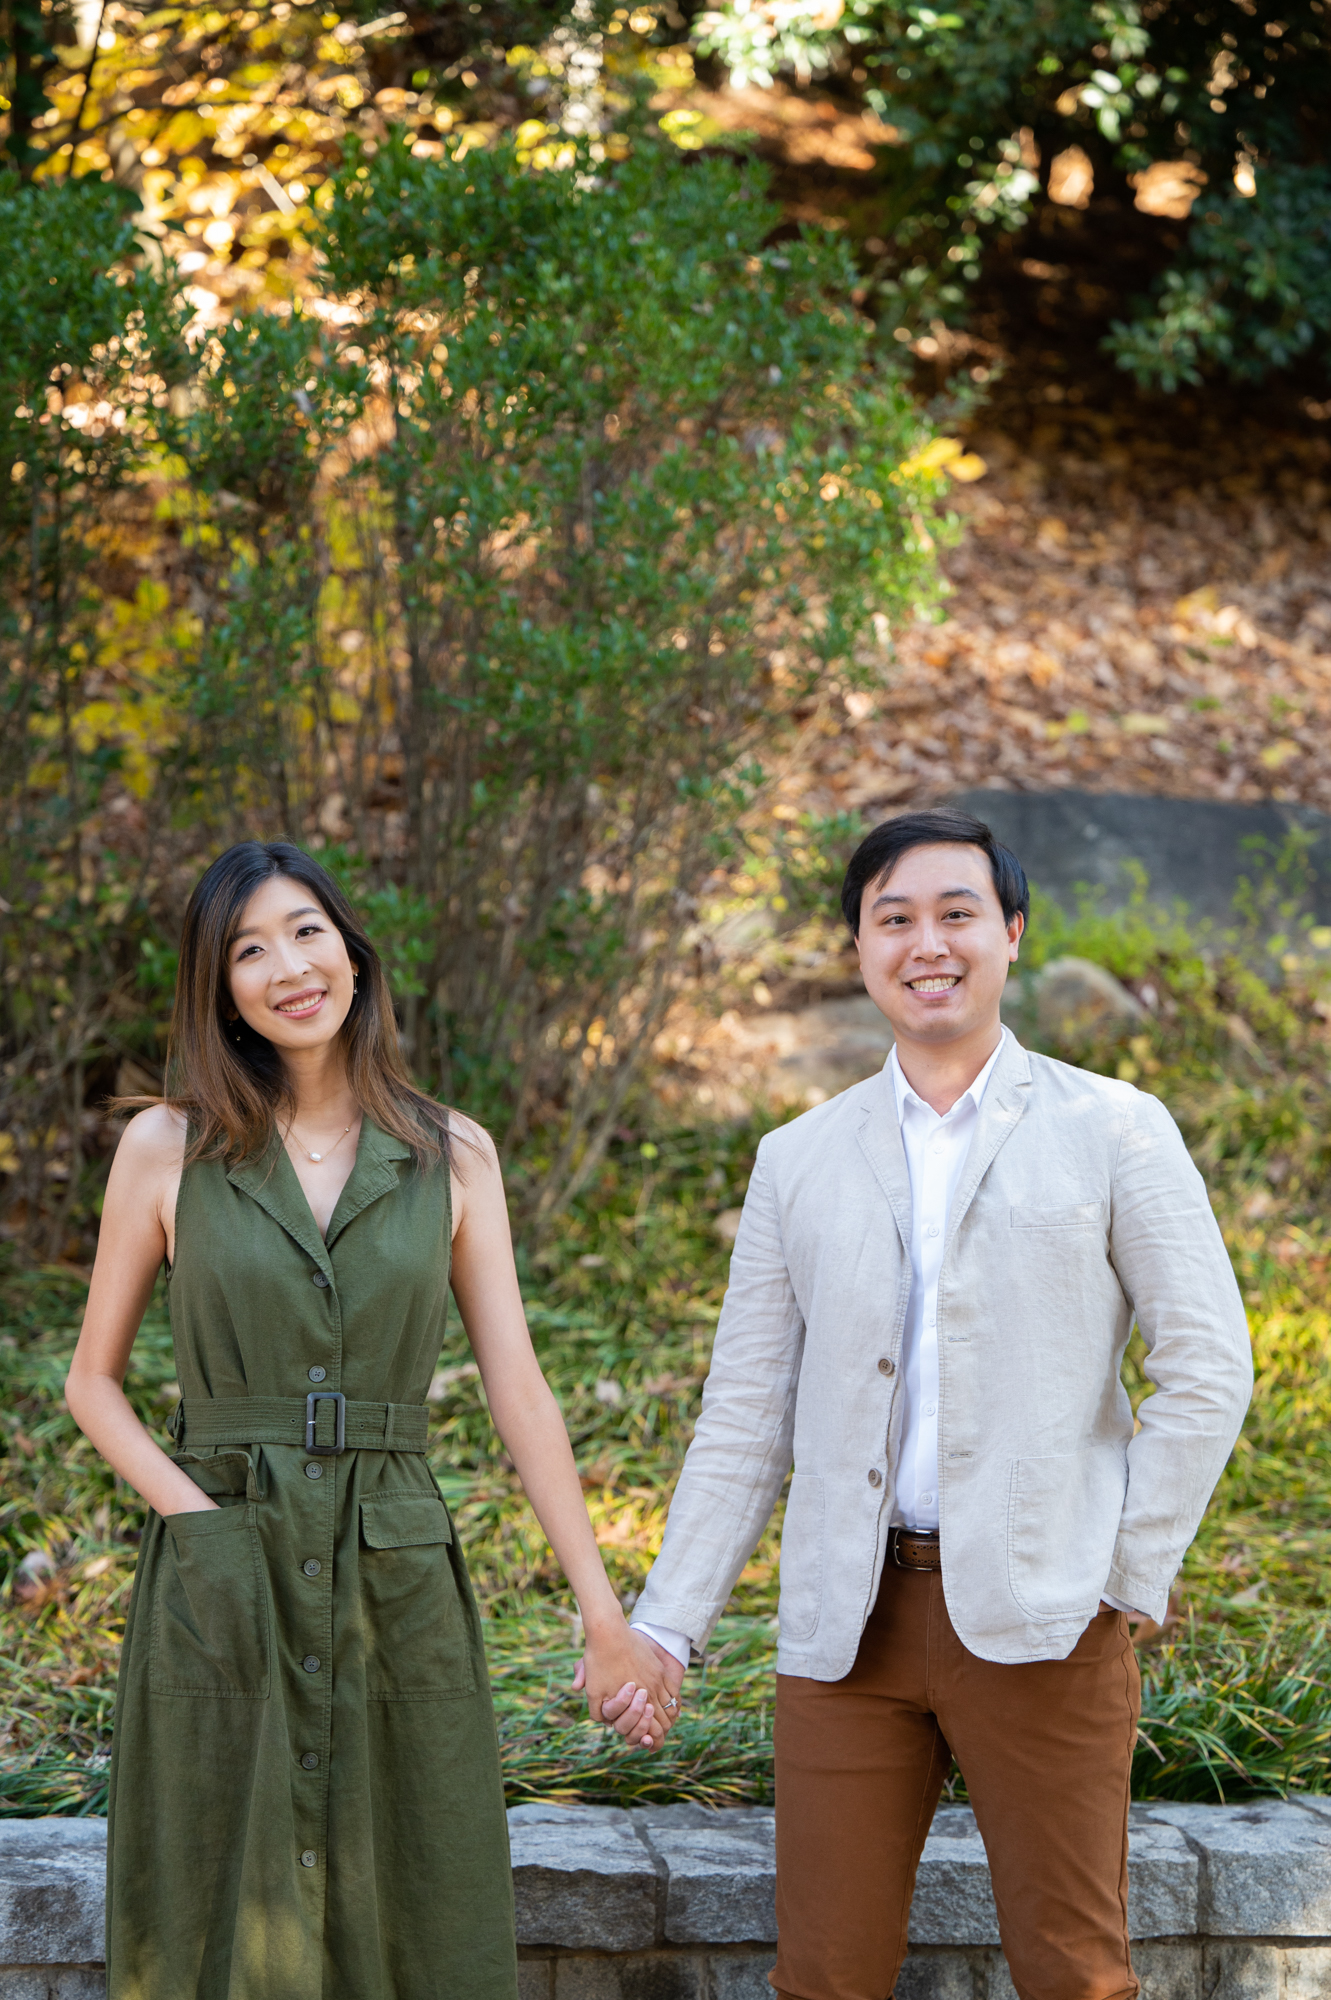 Piedmont Park engagement session in the fall